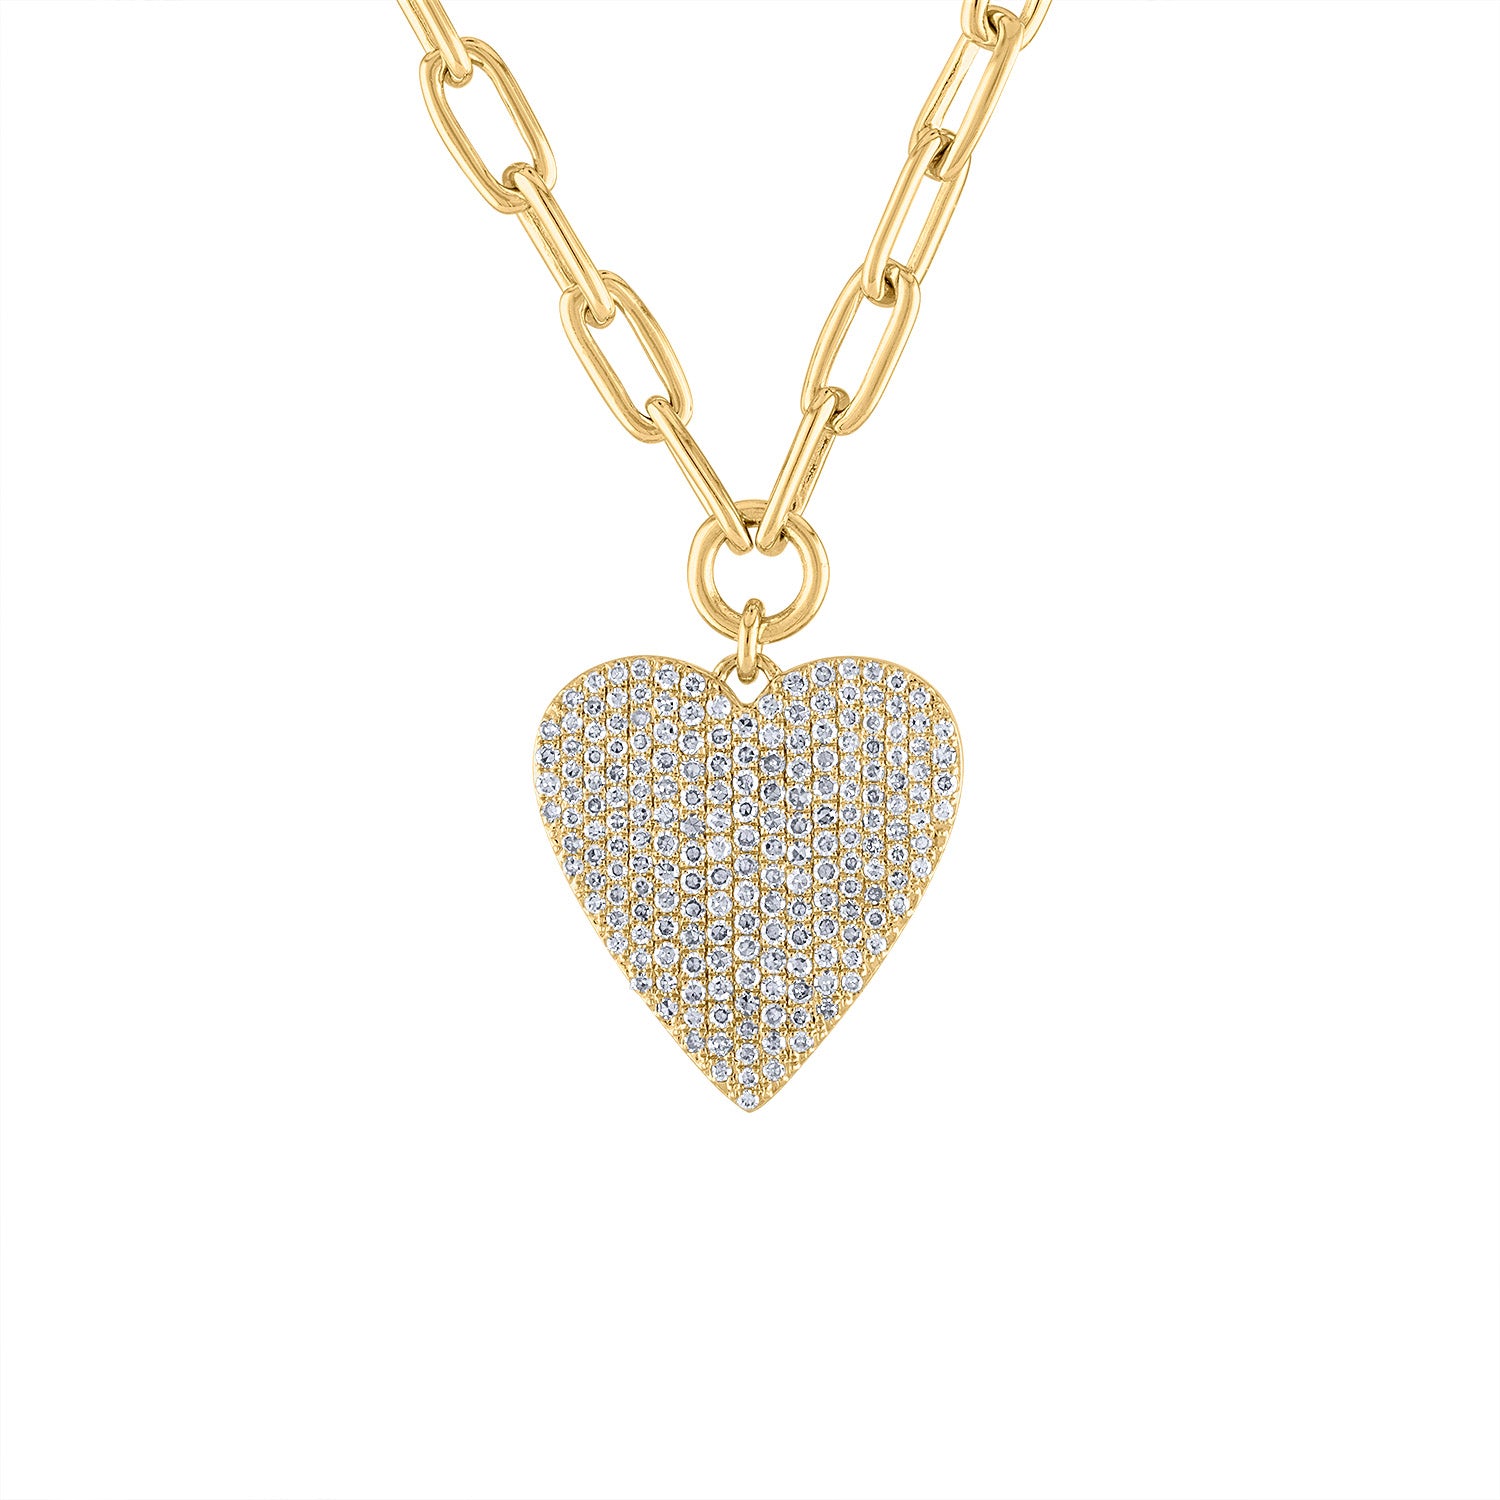 Princess Diamond and Gold Pave Collier Necklace, SKU 473778 (6.60Ct TW)